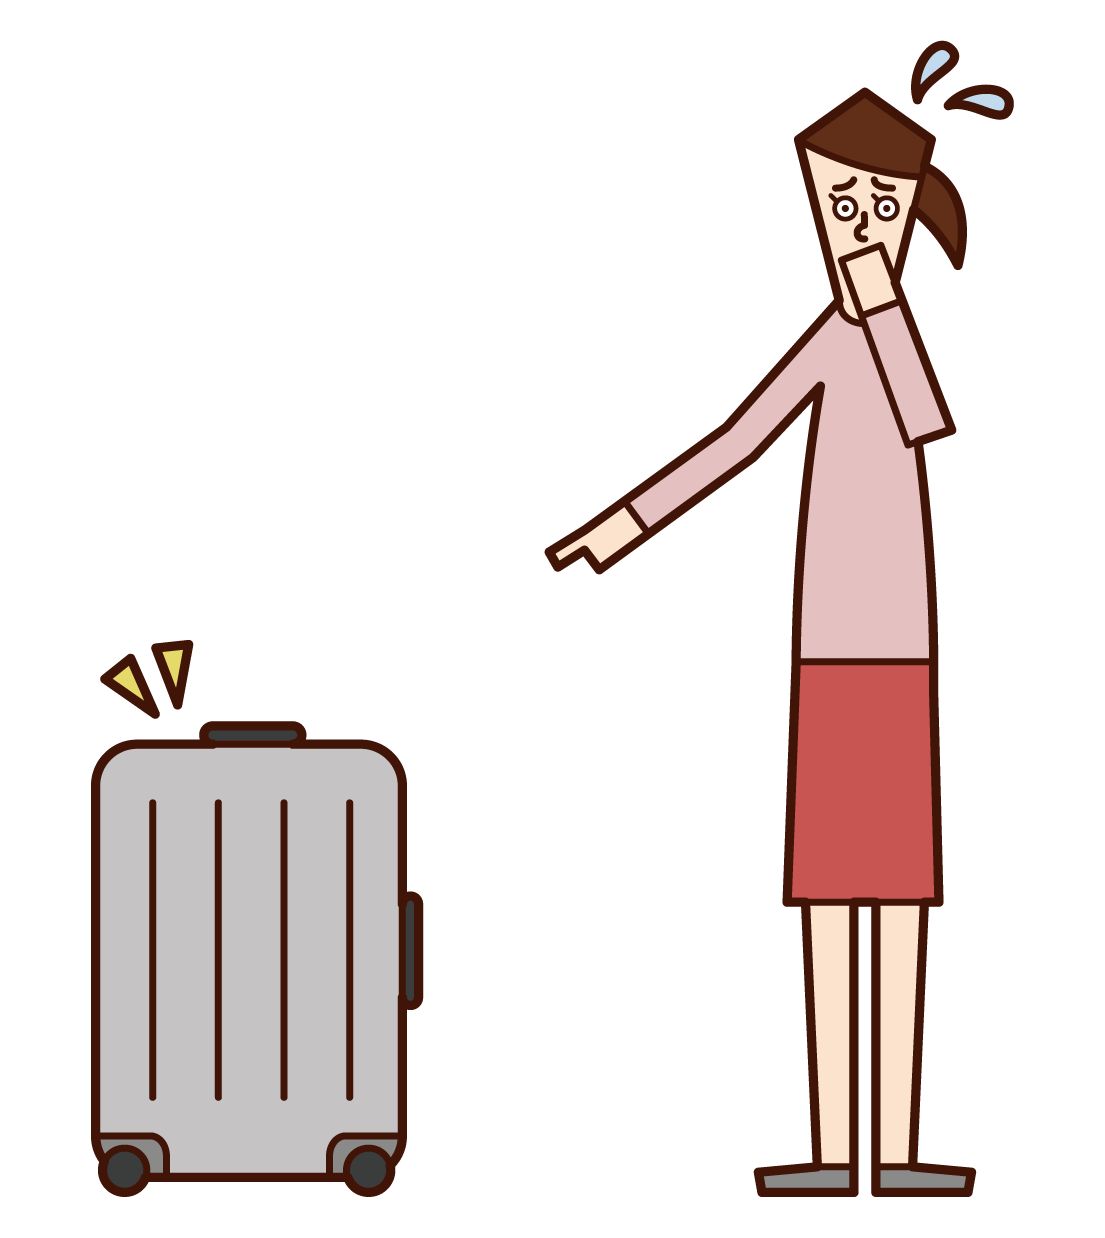 Illustration of a woman who found suspicious luggage